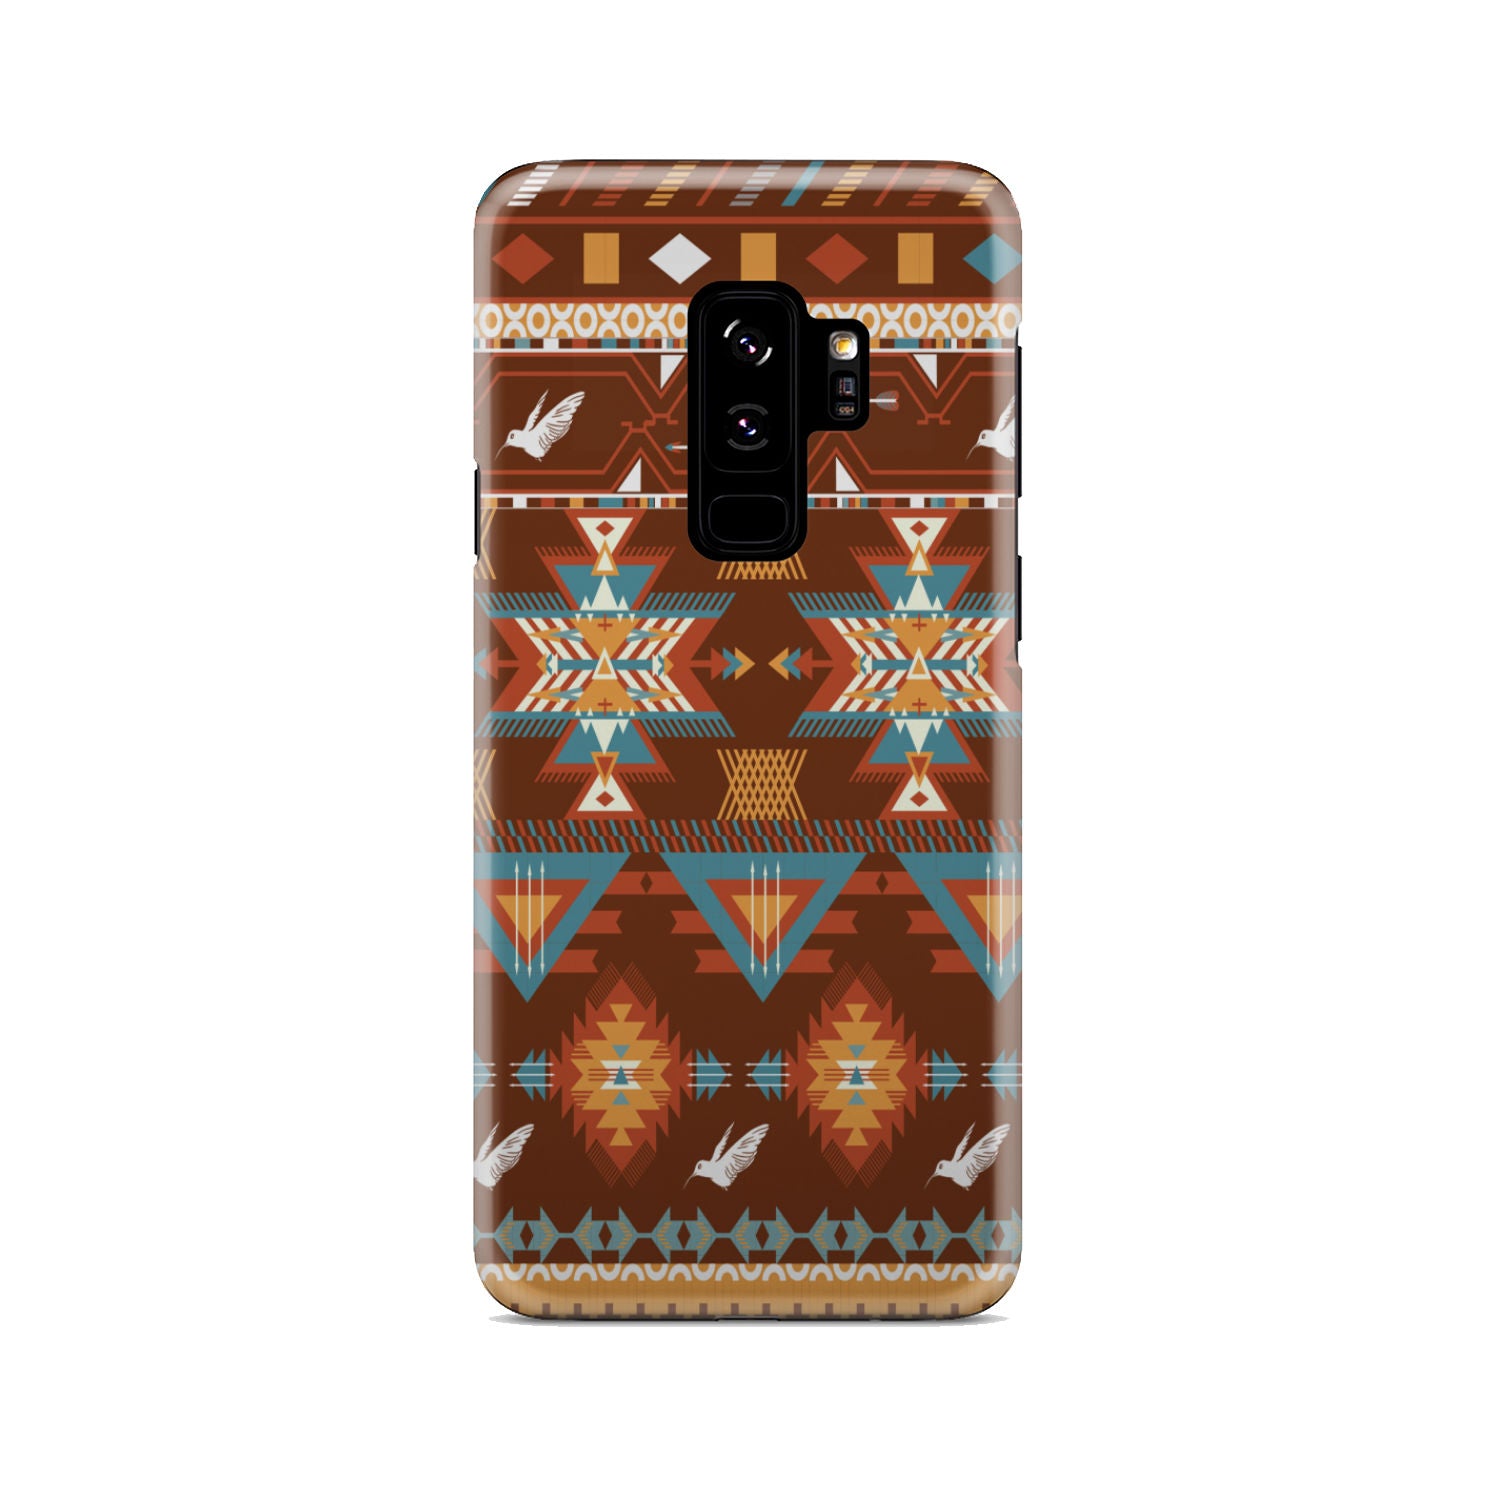 Powwow Store gb nat00580 pattern with birds phone case